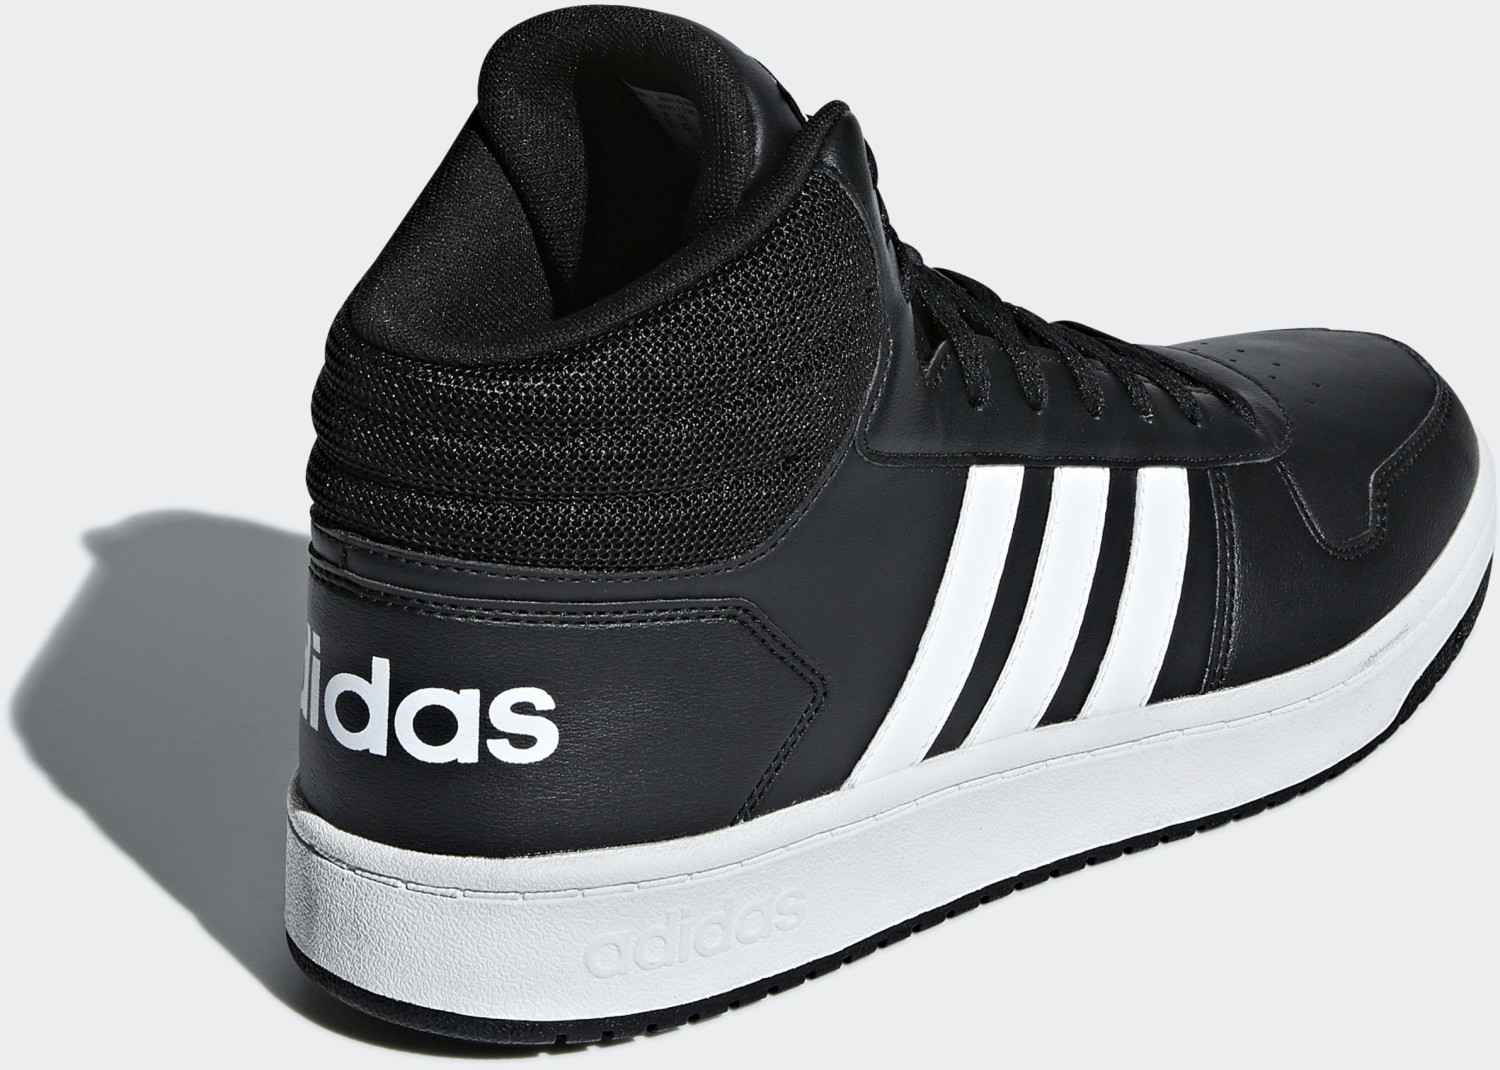 Buy Adidas VS Hoops Mid 2.0 core black/ftwr white/core black from £60. ...